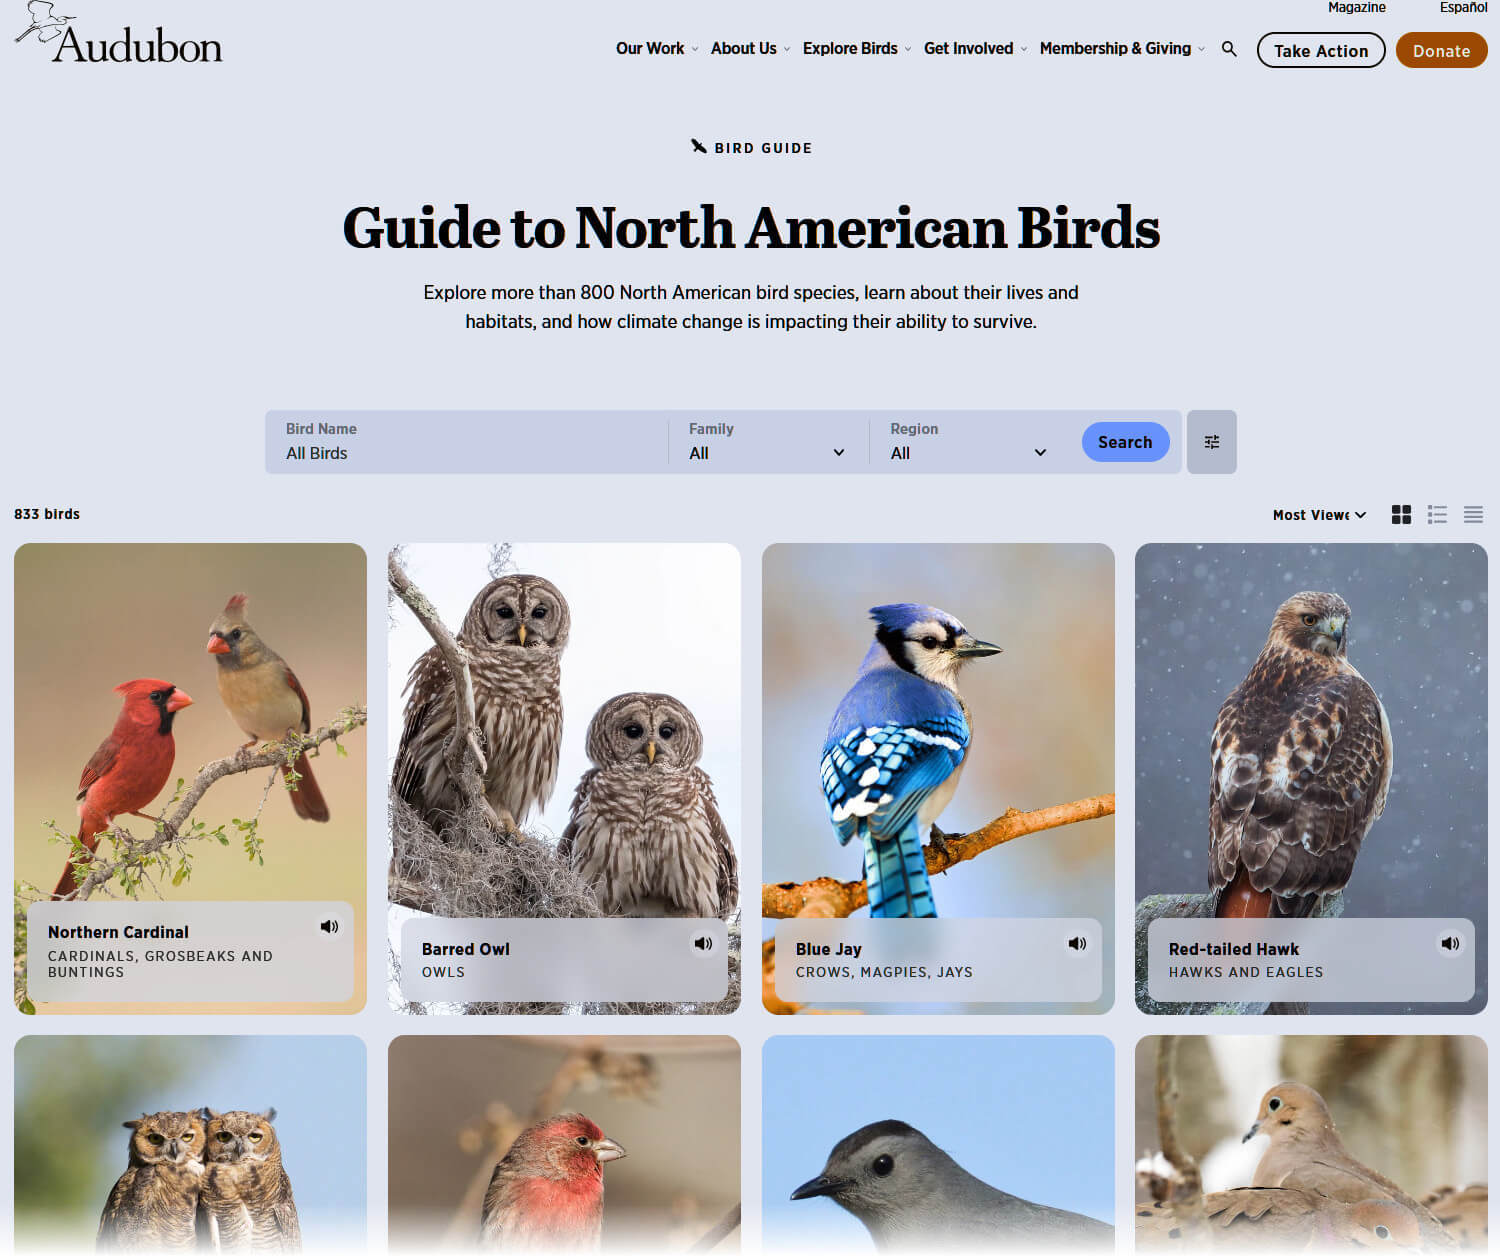 Web section from Audubon Bird Guide with photos of eight bird species and user interface elements for navigation.